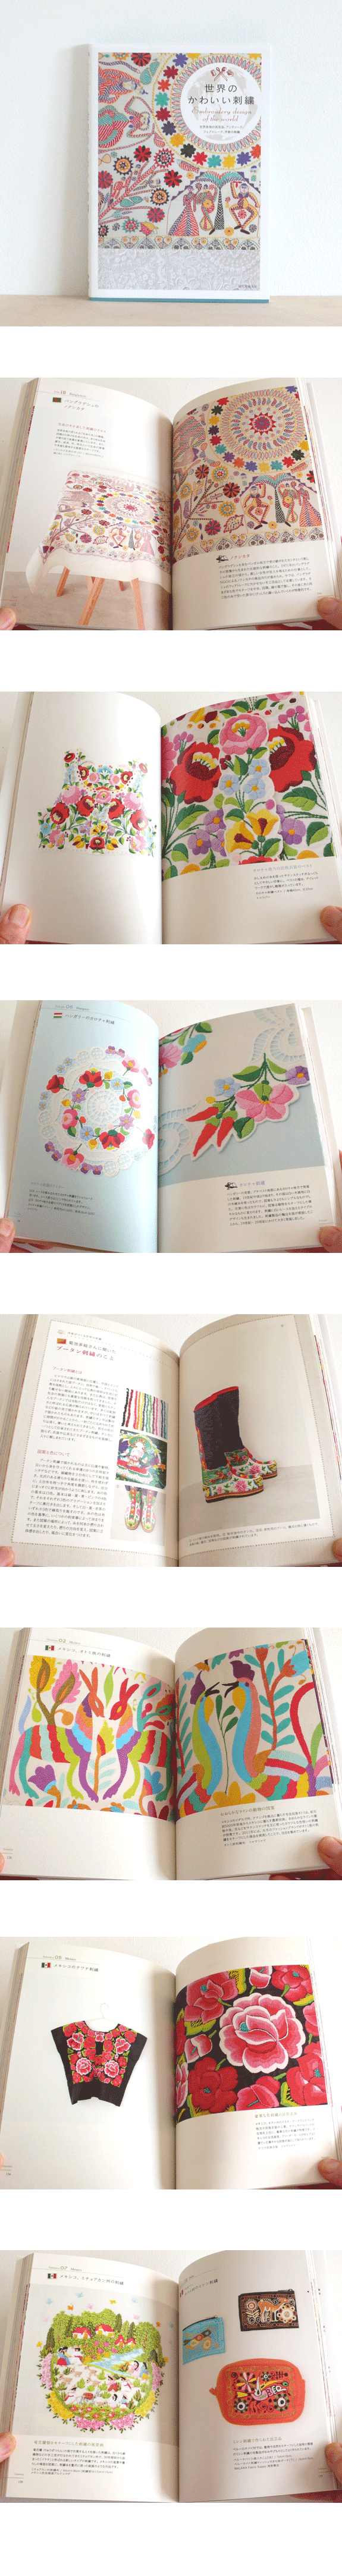 embroidery design of the world japanese craft book [japanese sewing books, japan craft books, japanese embroidery book]